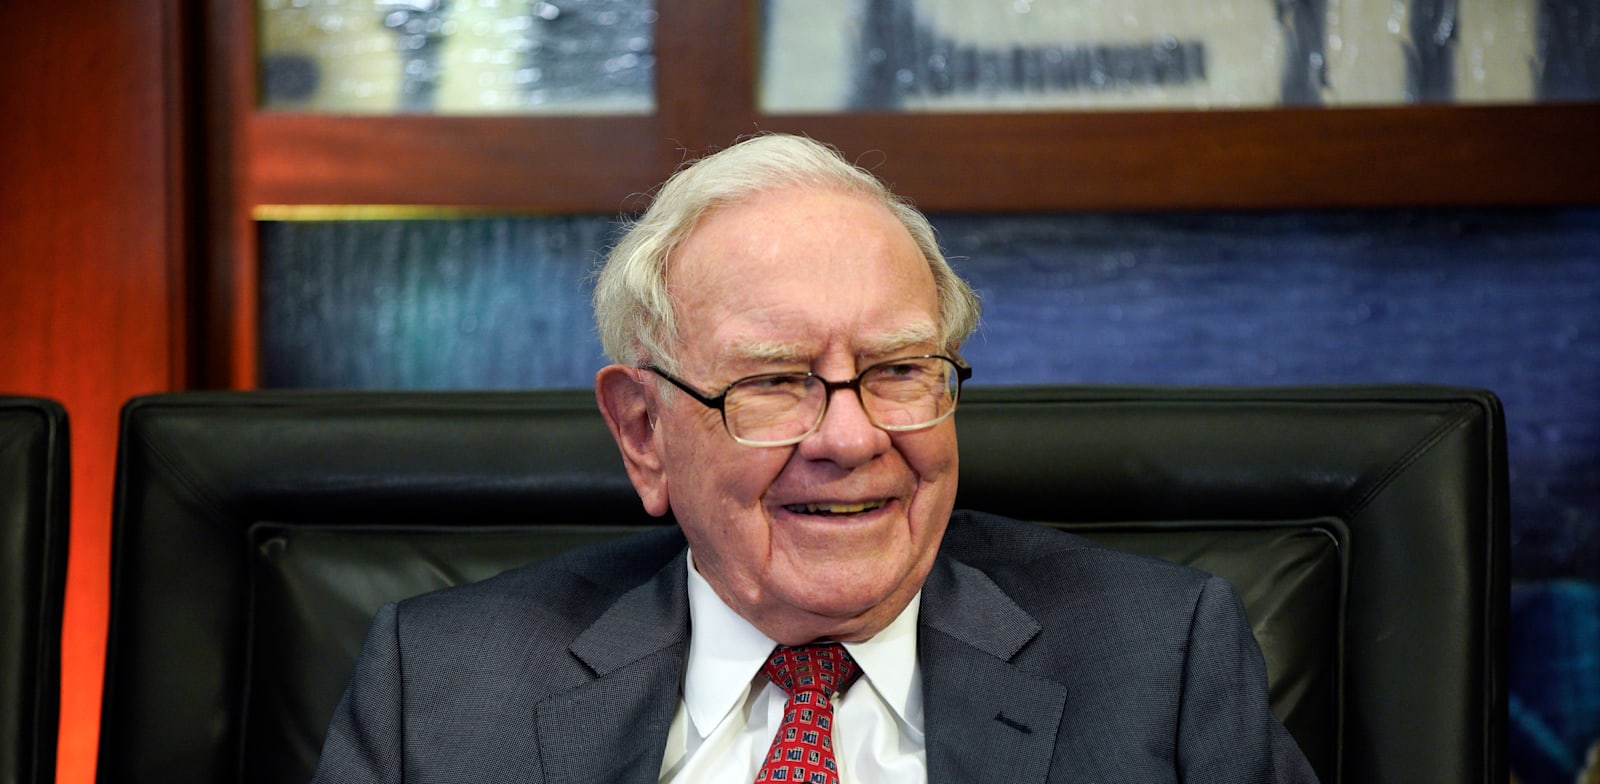 The Latest Investment from Warren Buffett and the Impending Record Breaker